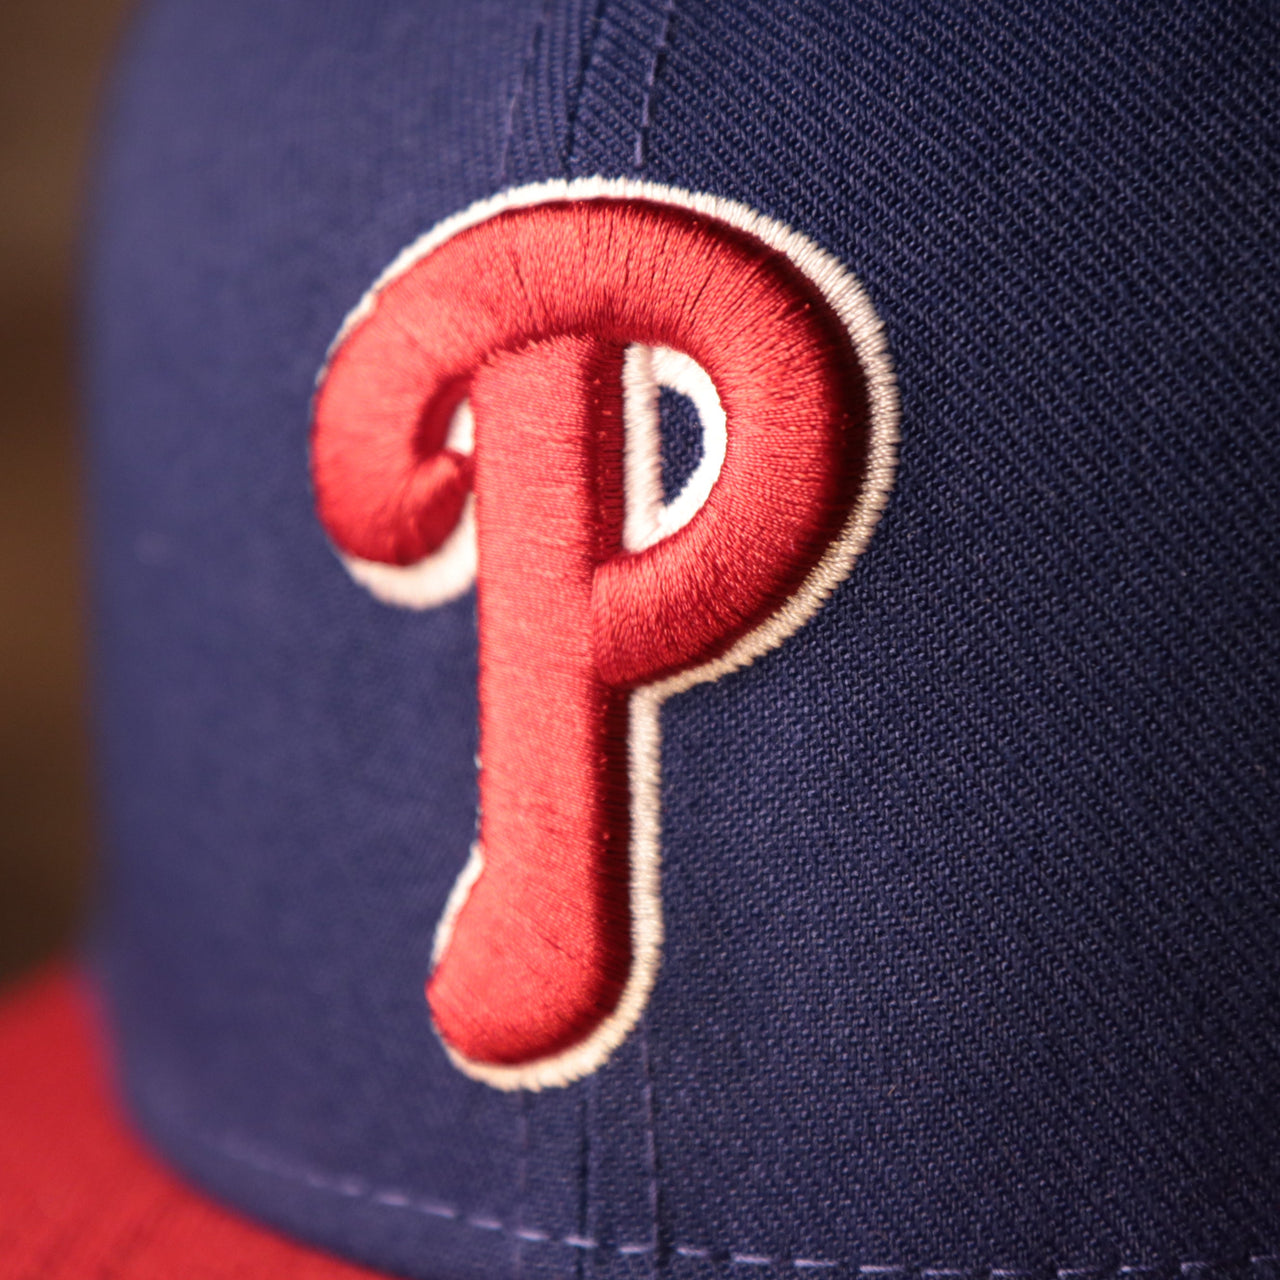 The Phillies Logo on the Philadelphia Phillies Blue on Red Game Authentic 59Fifty Fitted Cap